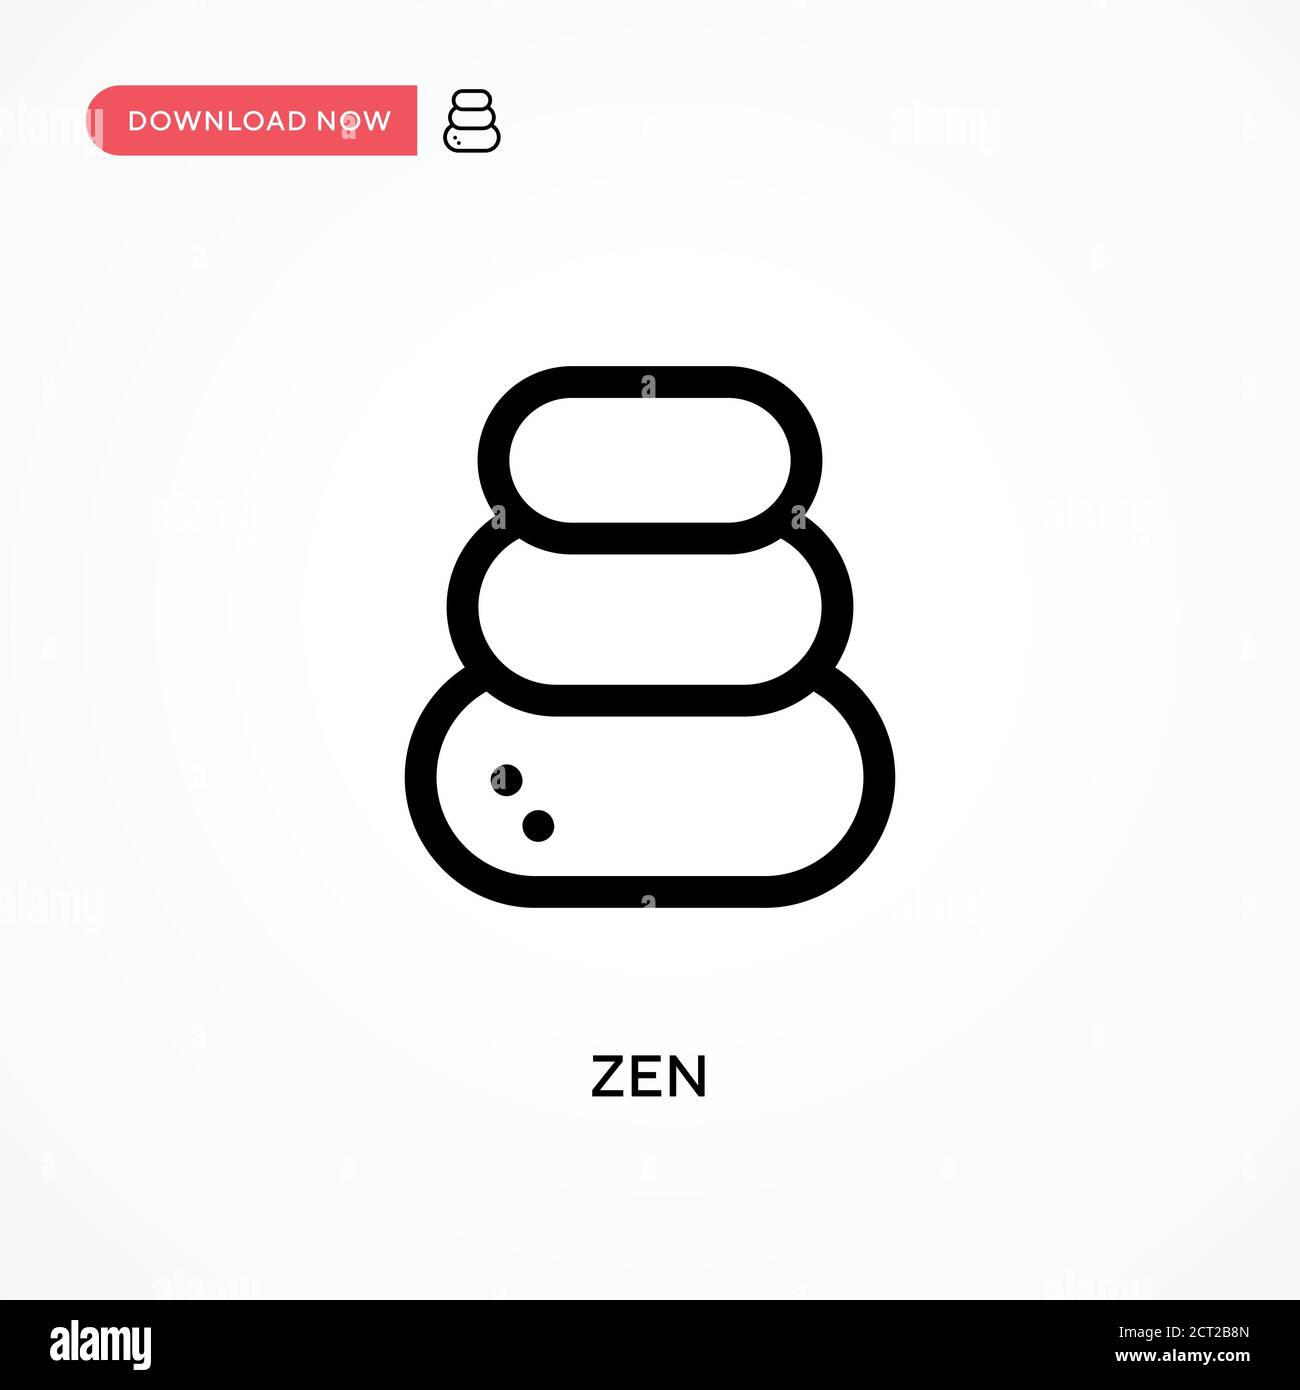 Zen Simple vector icon. Modern, simple flat vector illustration for web site or mobile app Stock Vector